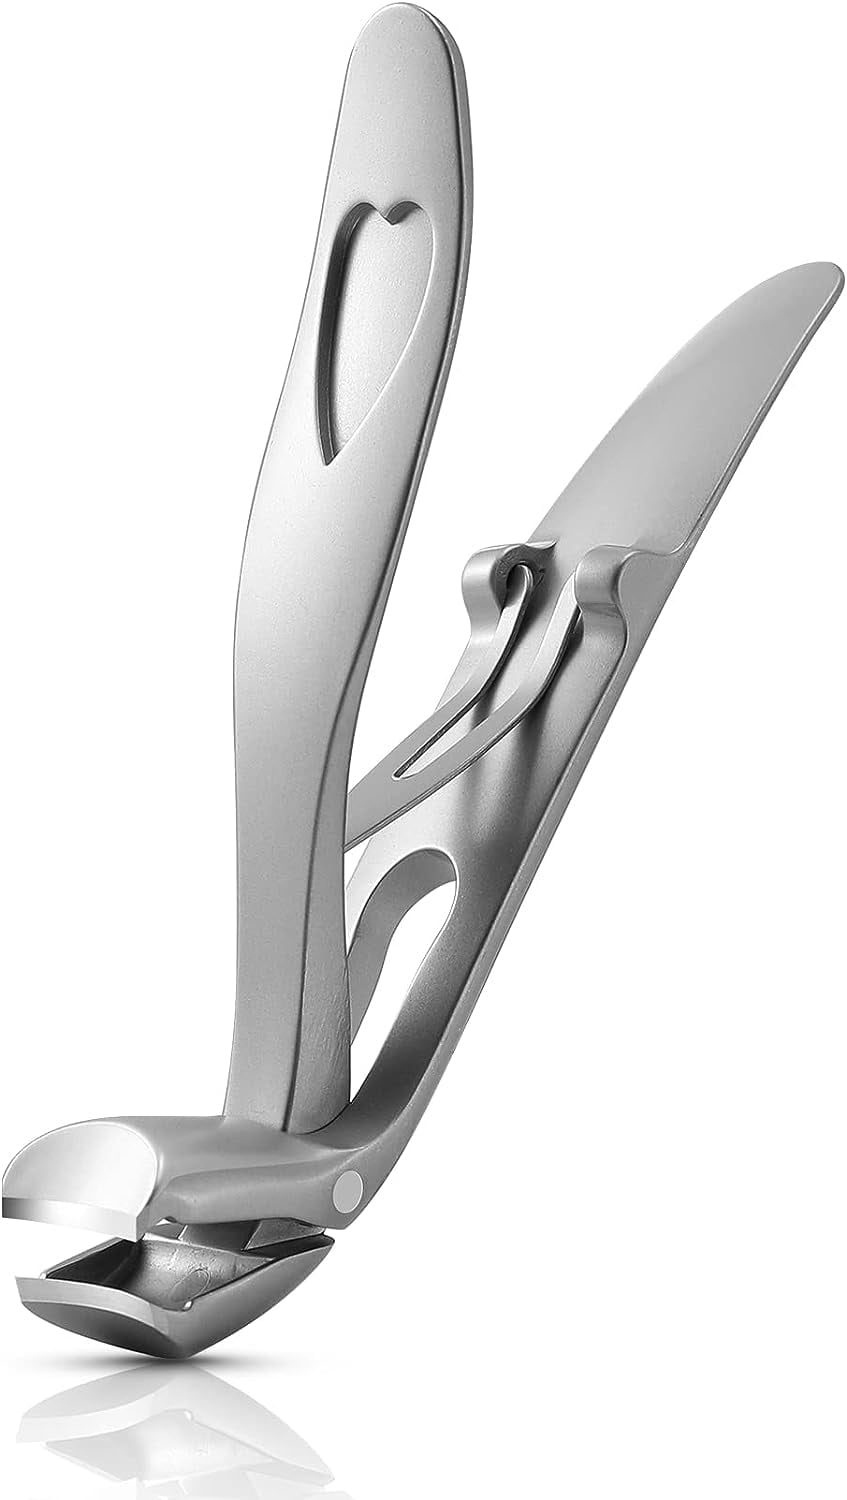 DOVO 517 006 Large Nail Clippers 3.0 Stainless Steel, Matte Finish -  KnifeCenter - Discontinued